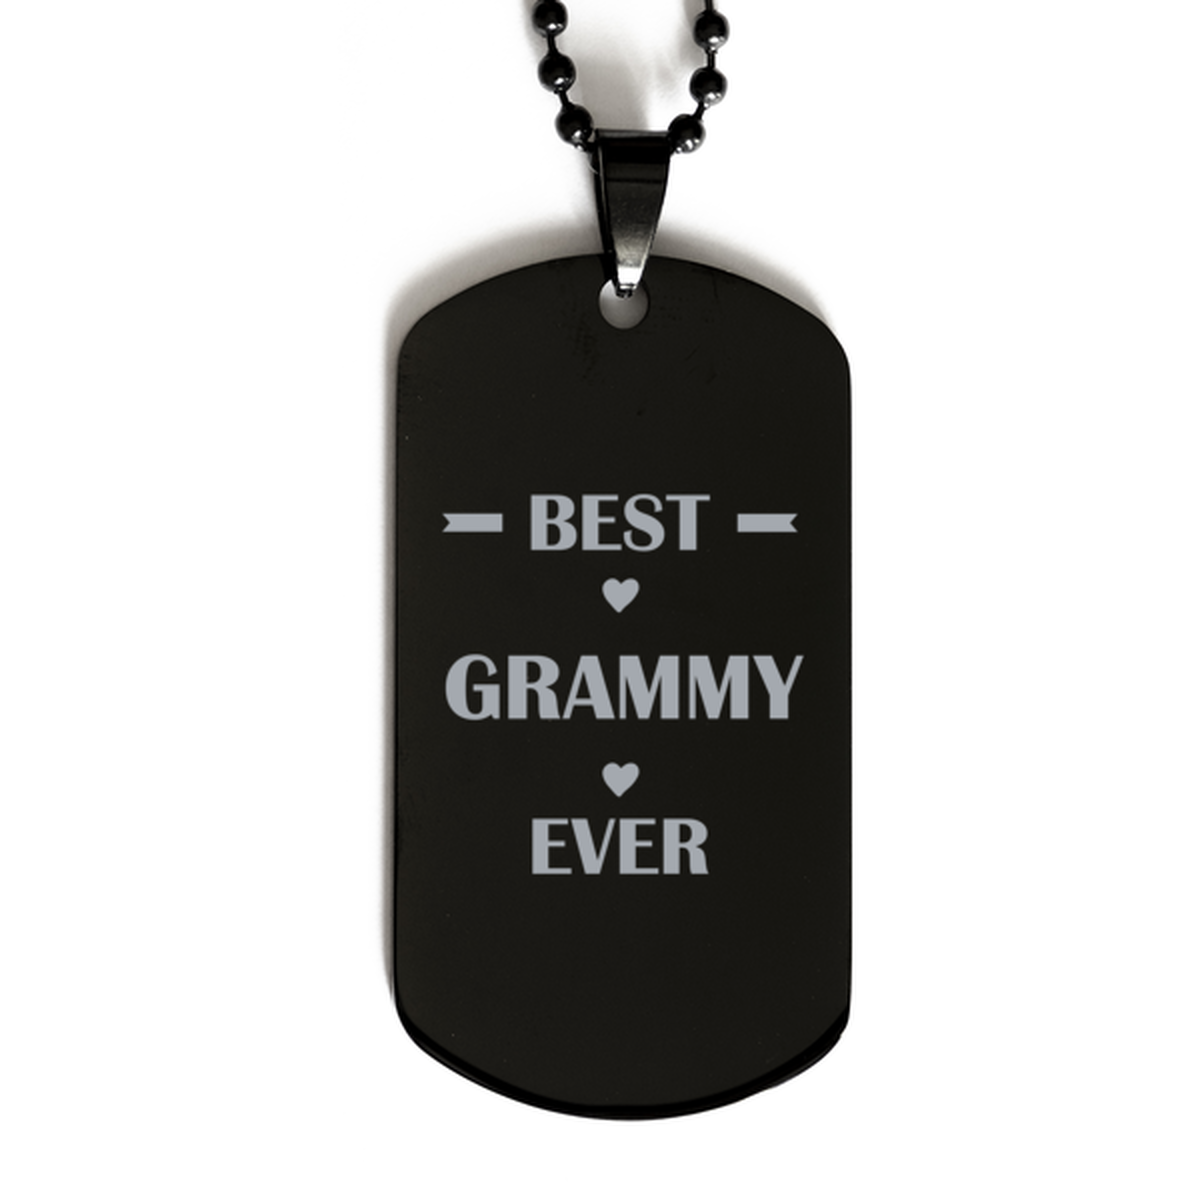 Best Grammy Ever Grammy Gifts, Funny Black Dog Tag For Grammy, Birthday Family Presents Engraved Necklace For Women